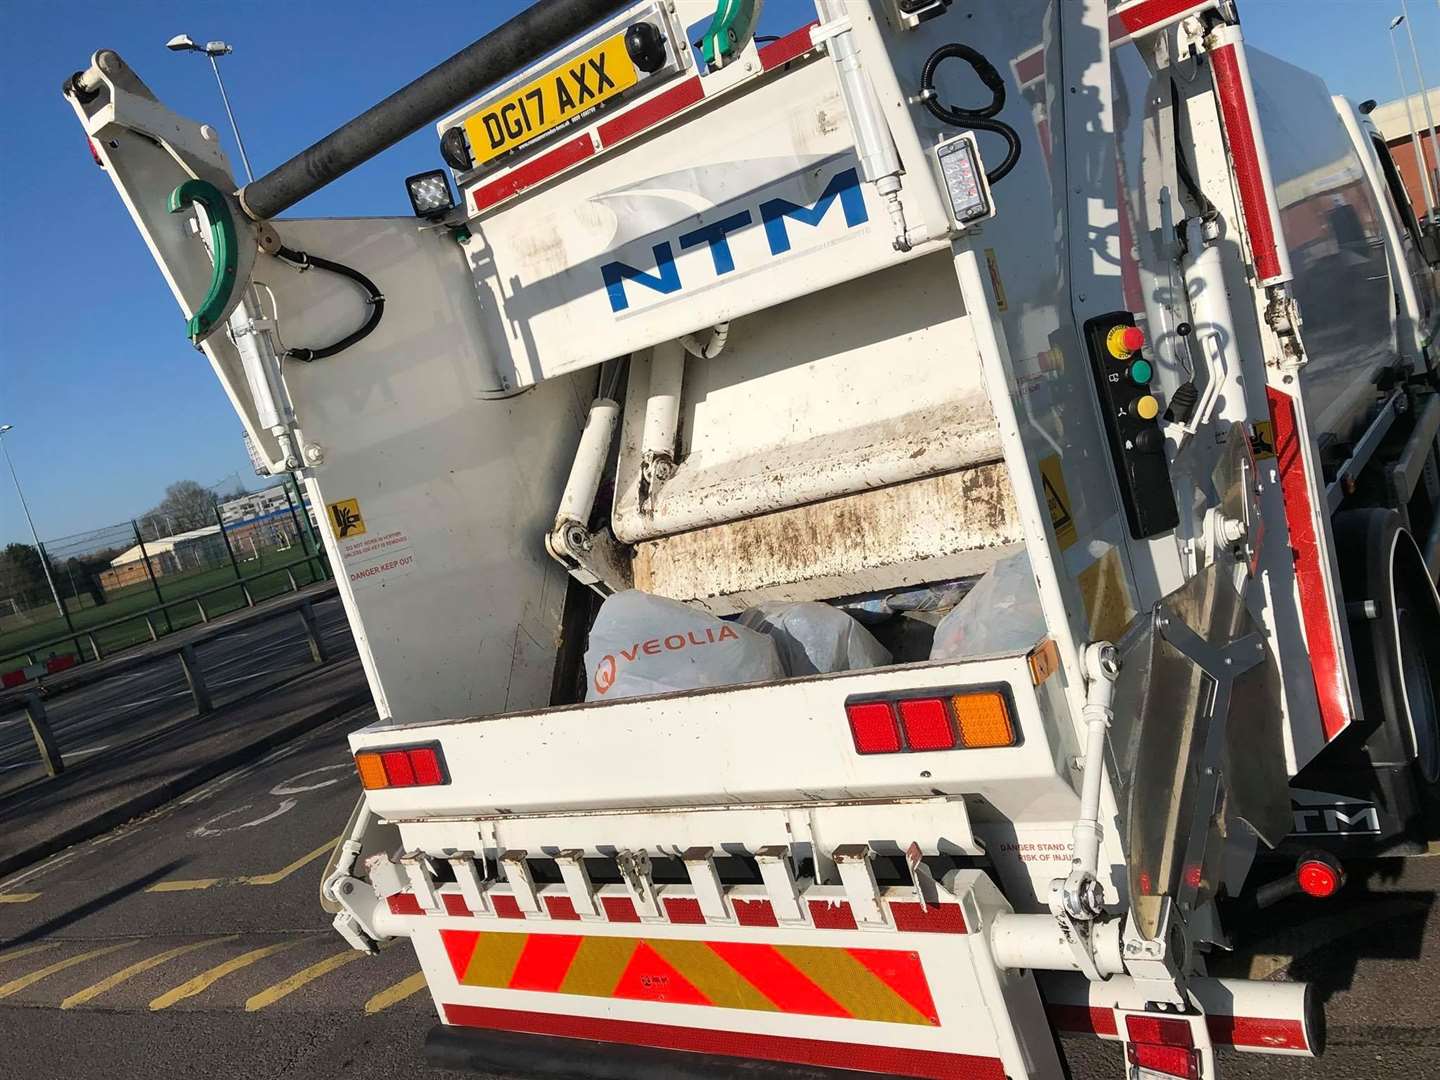 There have been ongoing issues with waste collection in Folkestone and Hythe